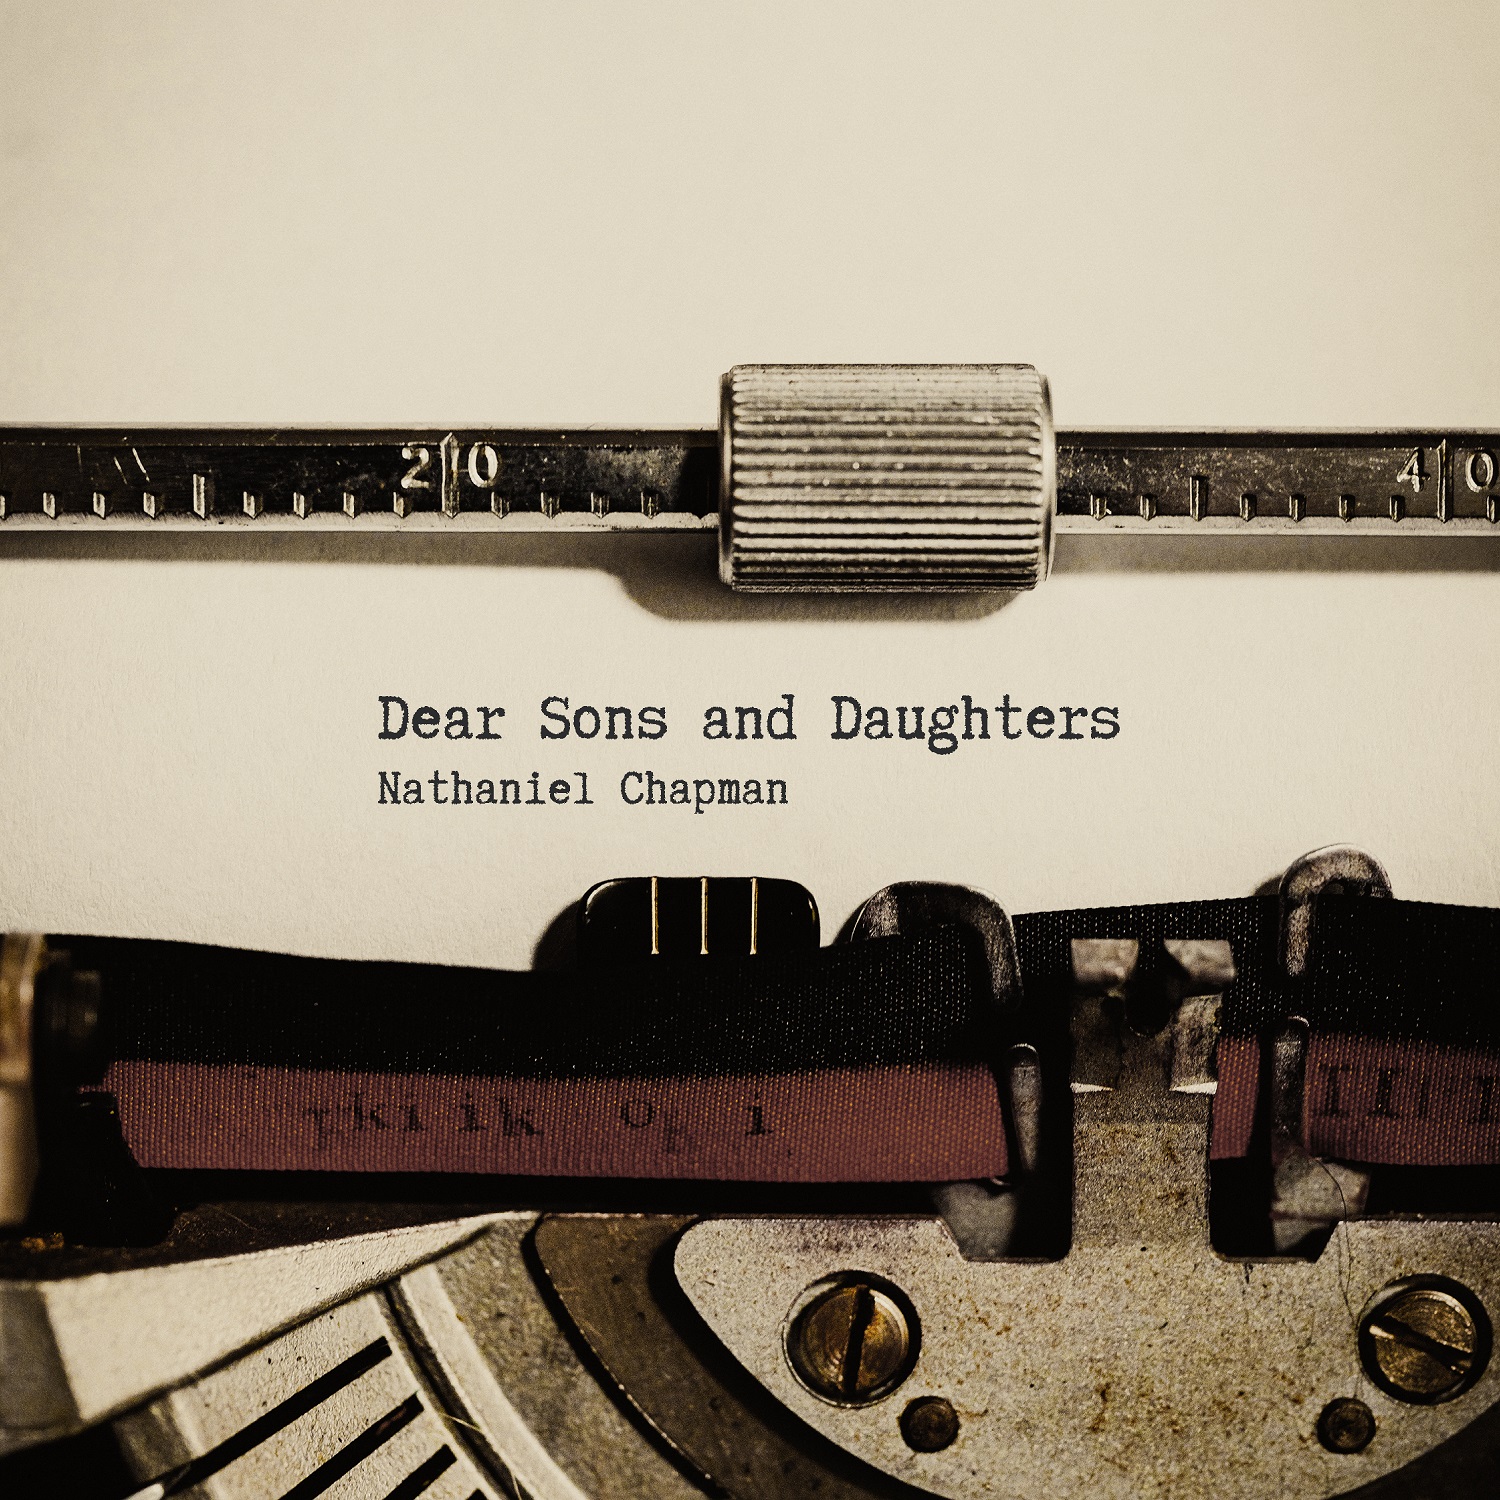 Nathaniel Chapman Pens an Open Letter to the Church on His Album, "Dear Sons and Daughters"